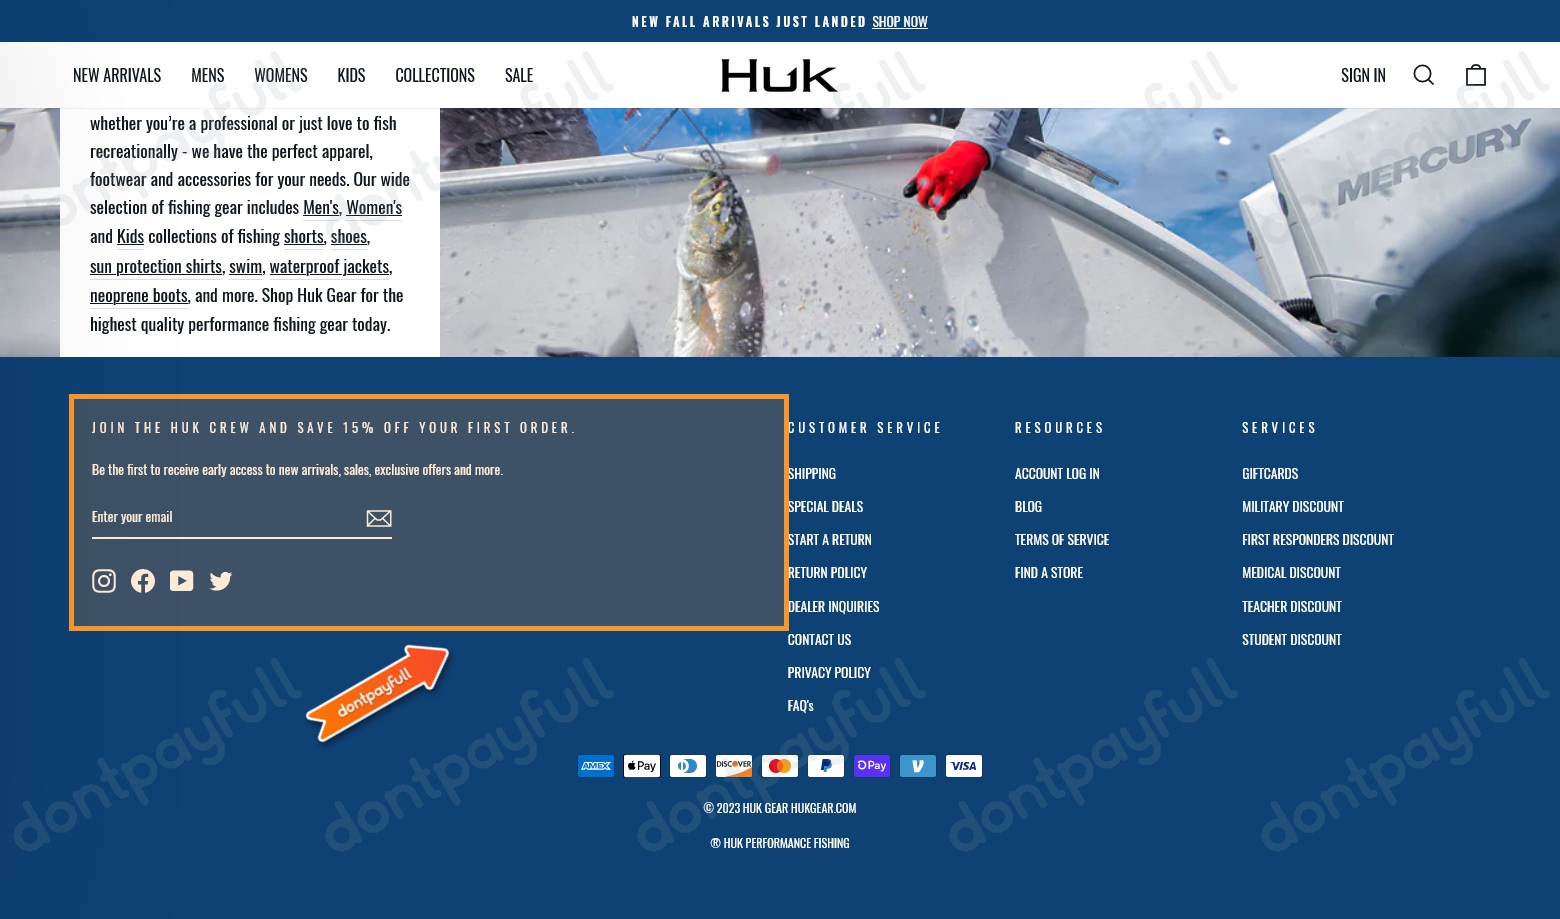 20% Off Huk Gear Coupons, Promo Codes, Deals